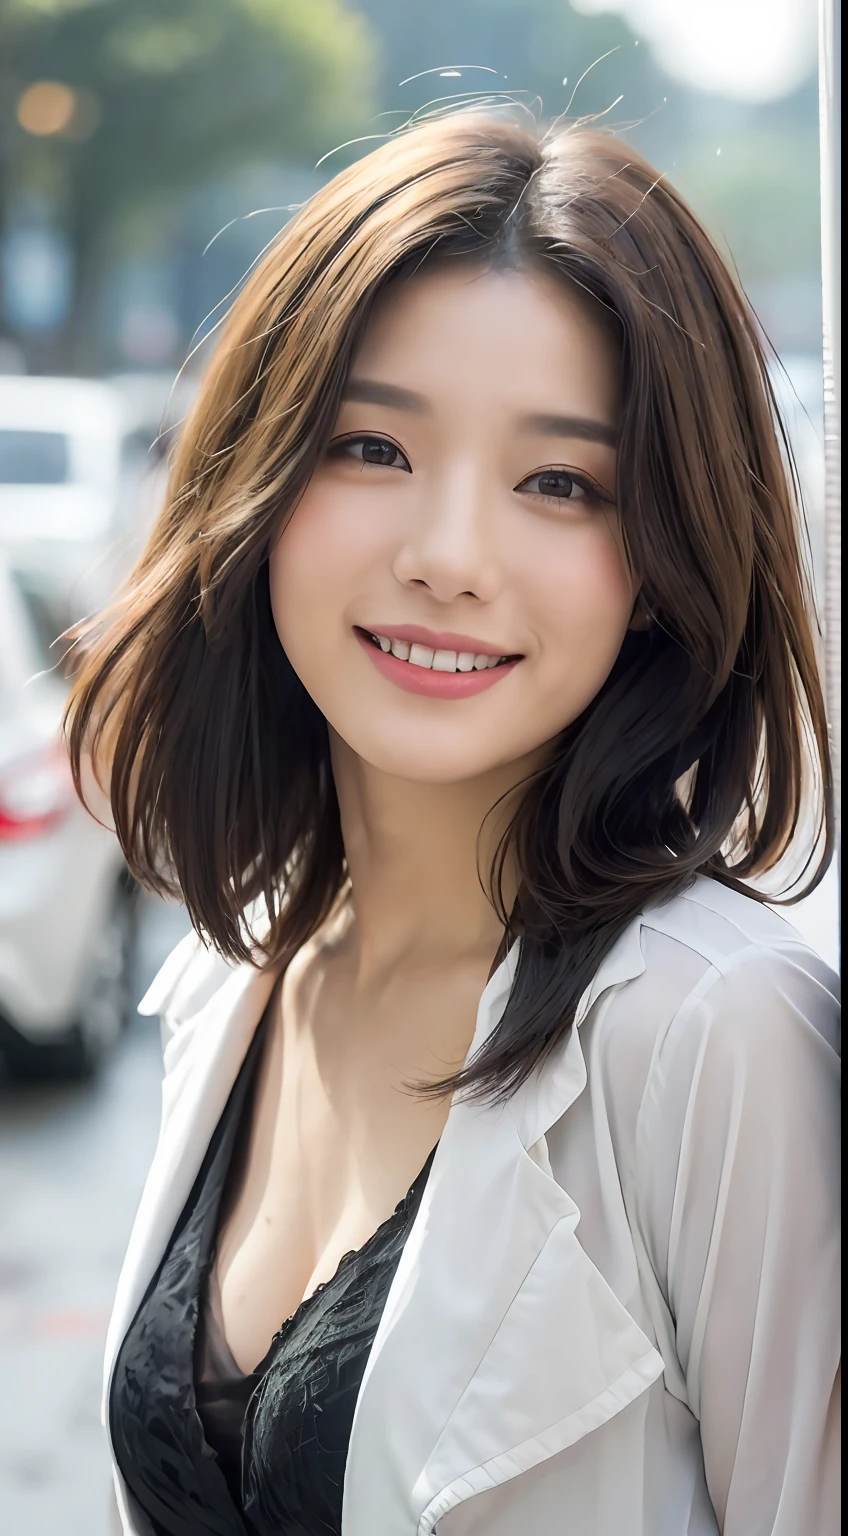 ((best qualtiy, 8K, tmasterpiece:1.3)), Focus:1.2, perfect figure beautiful woman:1.4,, ((Cut hair in layers, Beautiful breasts:1.2)),(rain, street:1.3)，Highly detailed facial and skin texture, A detailed eye, double eyelid，Whiten skin，long whitr hair，ssmile